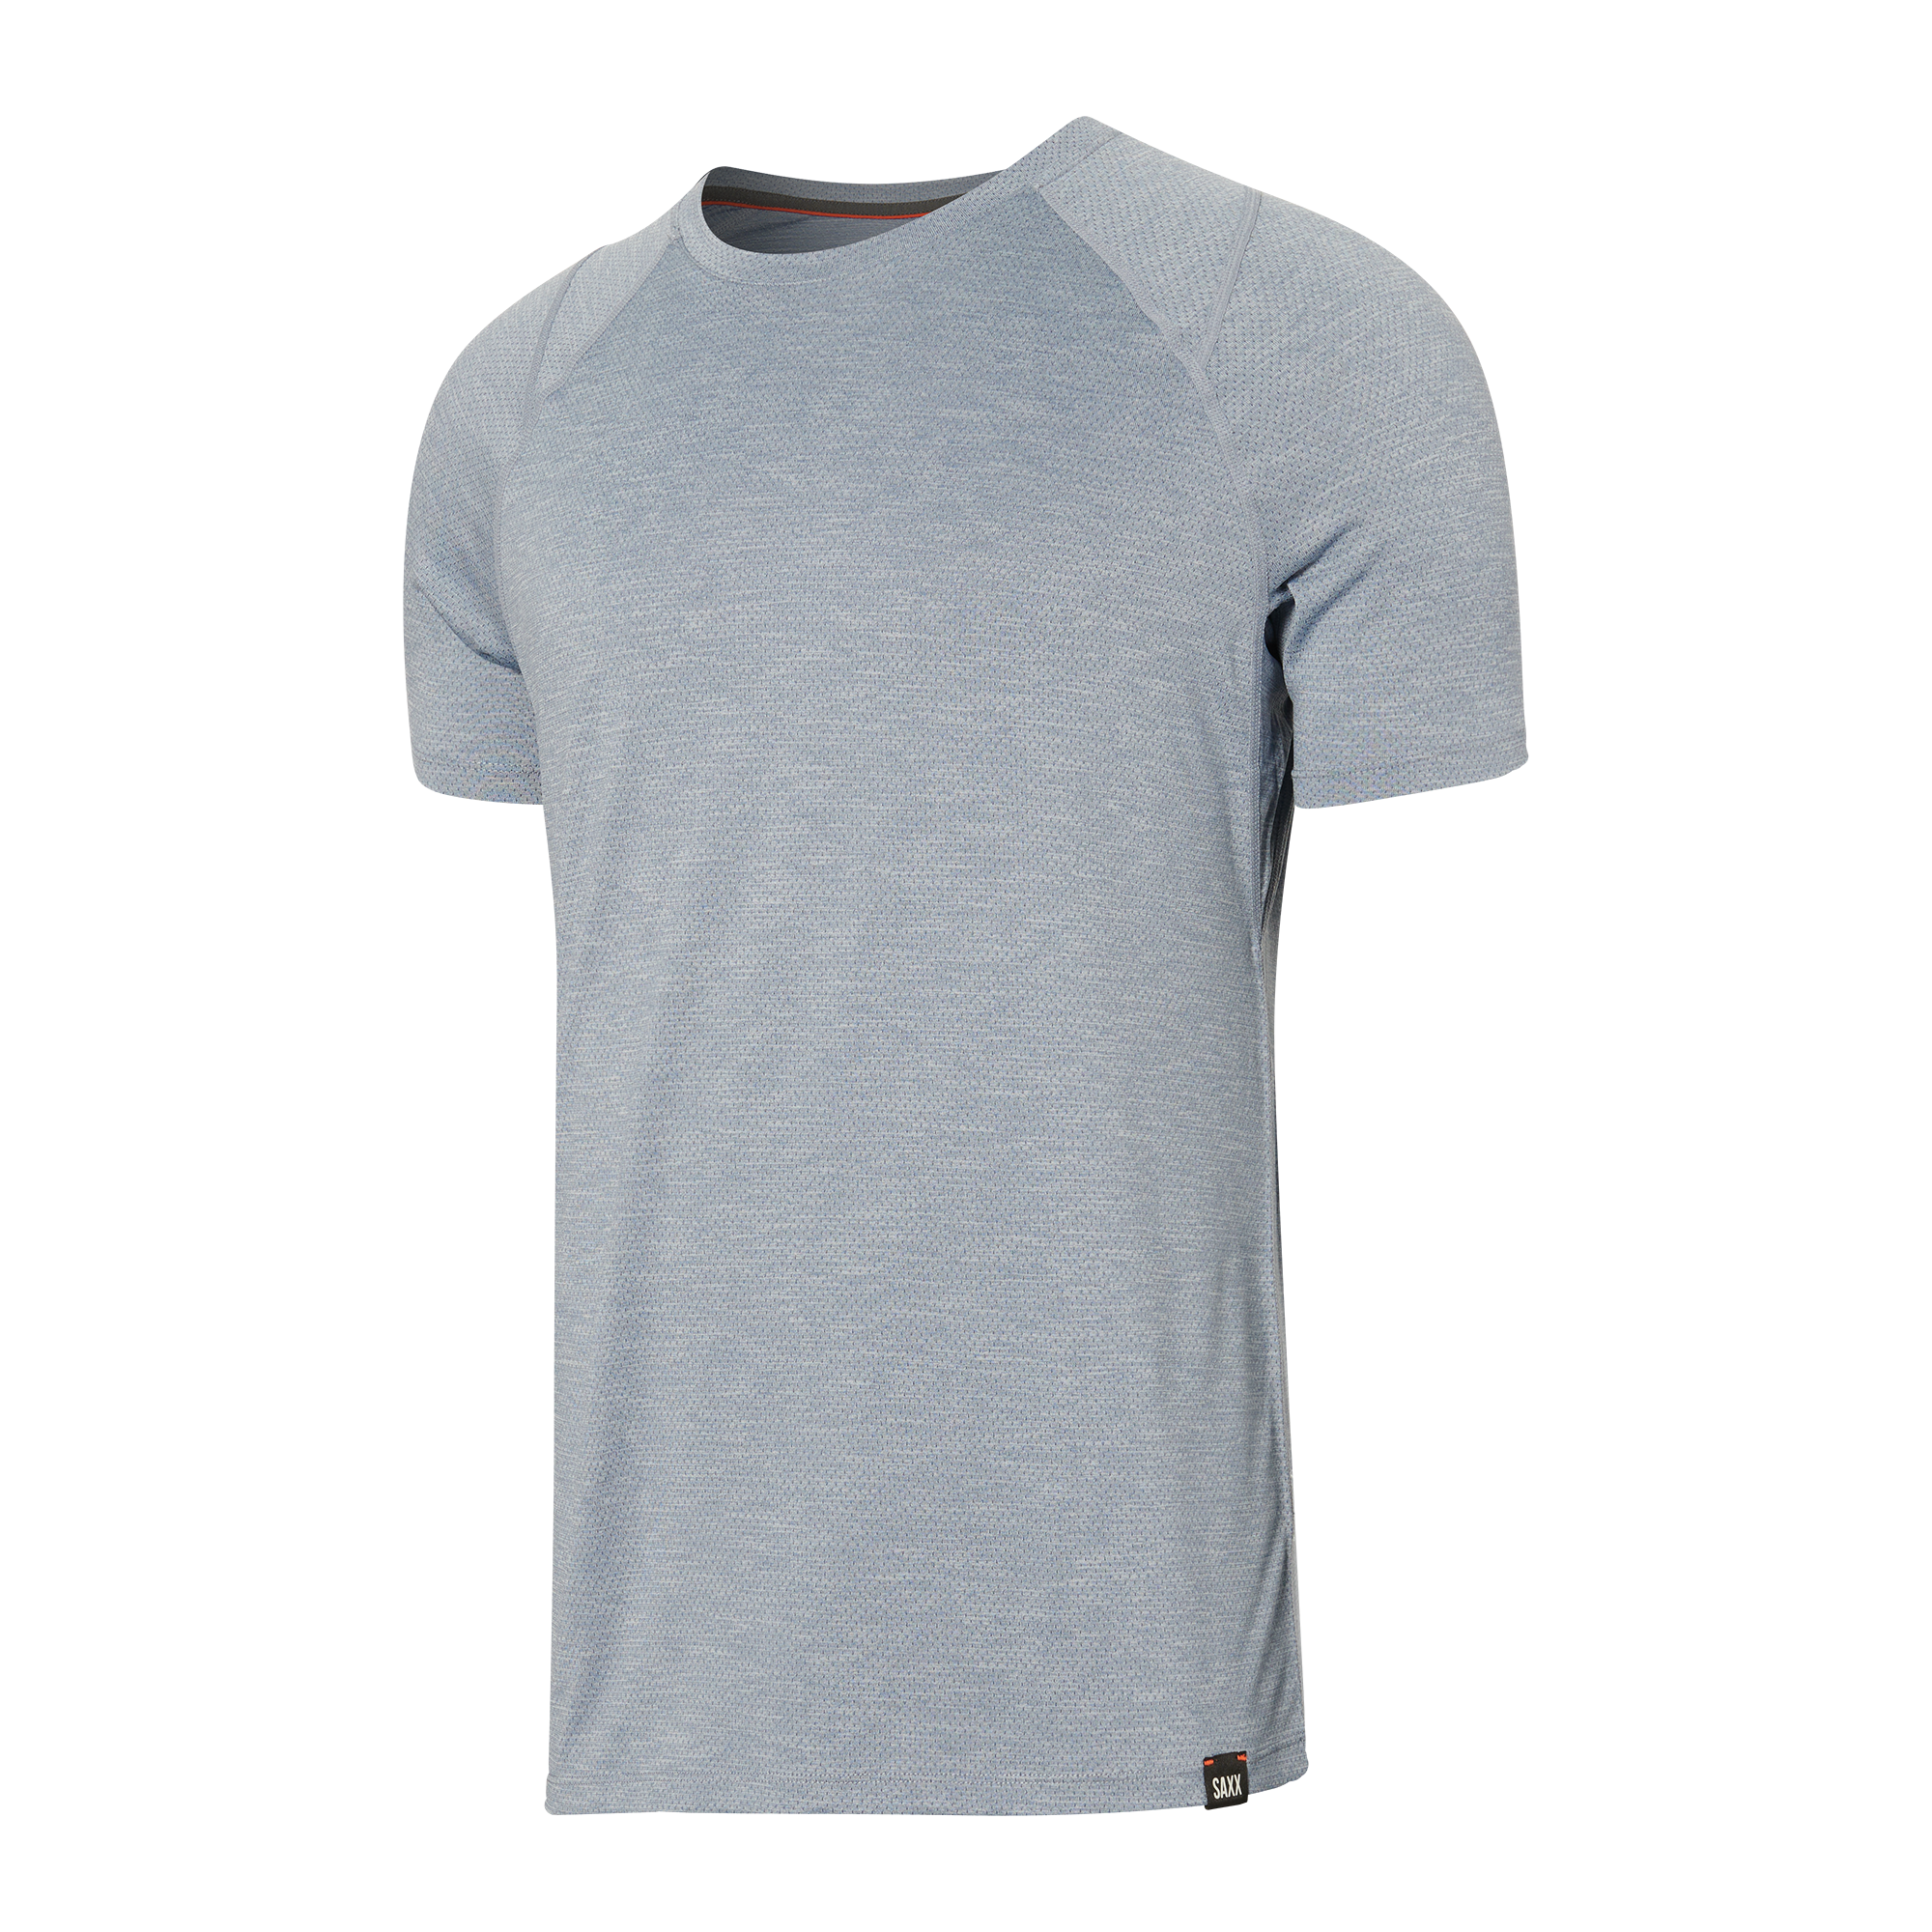 Front of Aerator Short Sleeve Tee in Blue Fog Heather